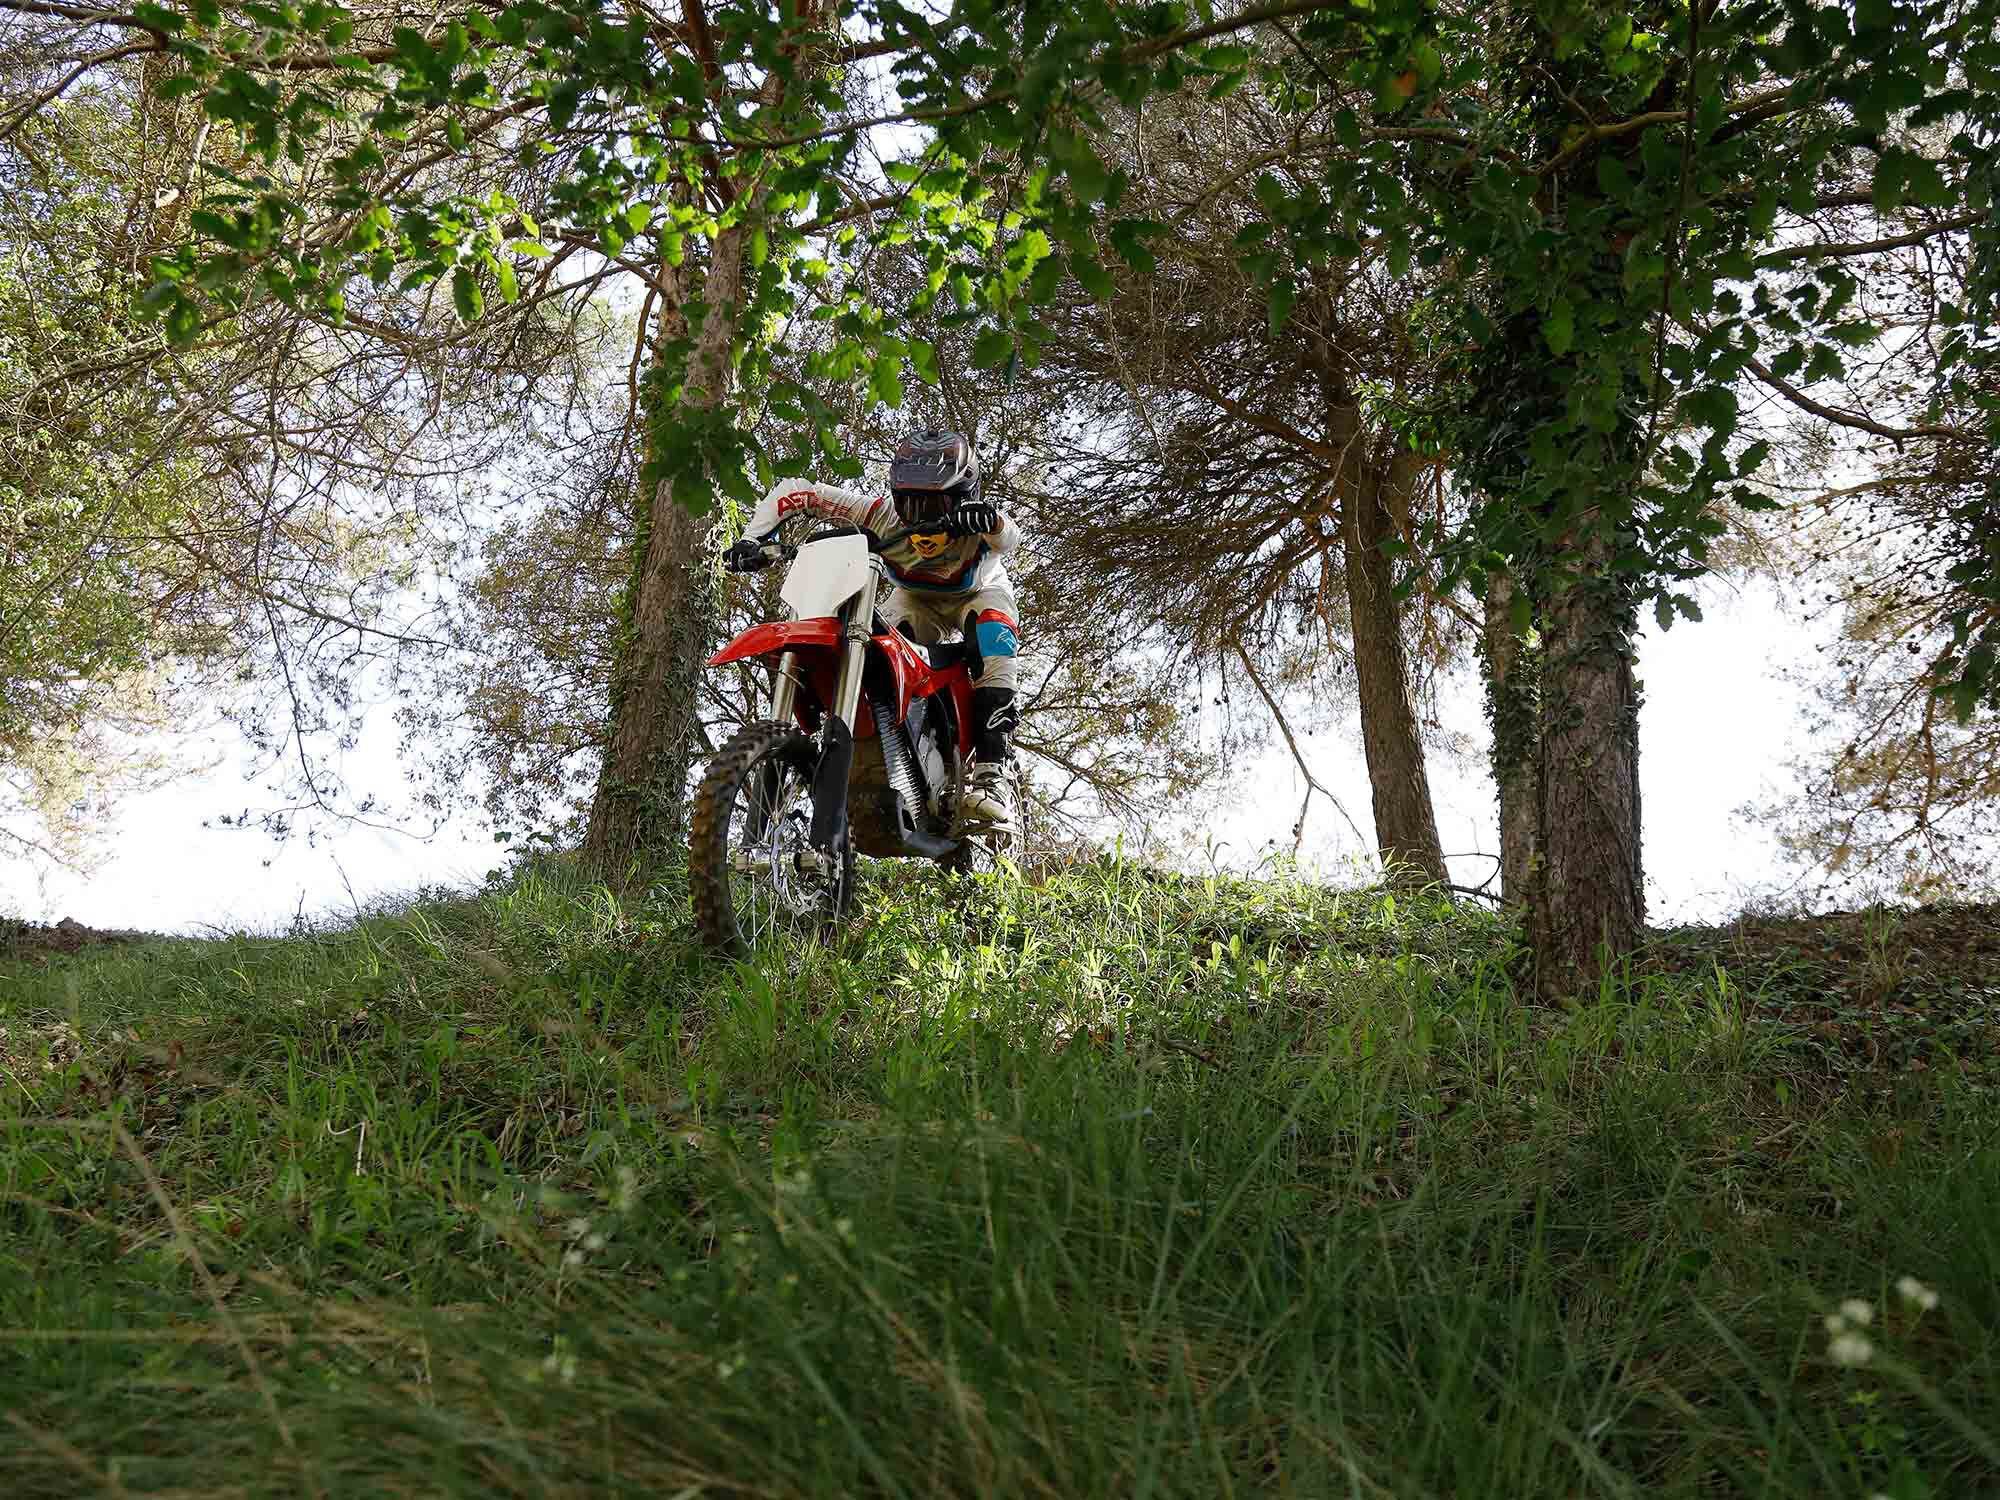 Moto developed, trail ready. In the next stage of the Stark development there will be more lighting options for enduro-minded riders. Until then you can order the current model with an 18-inch wheel and a kickstand.